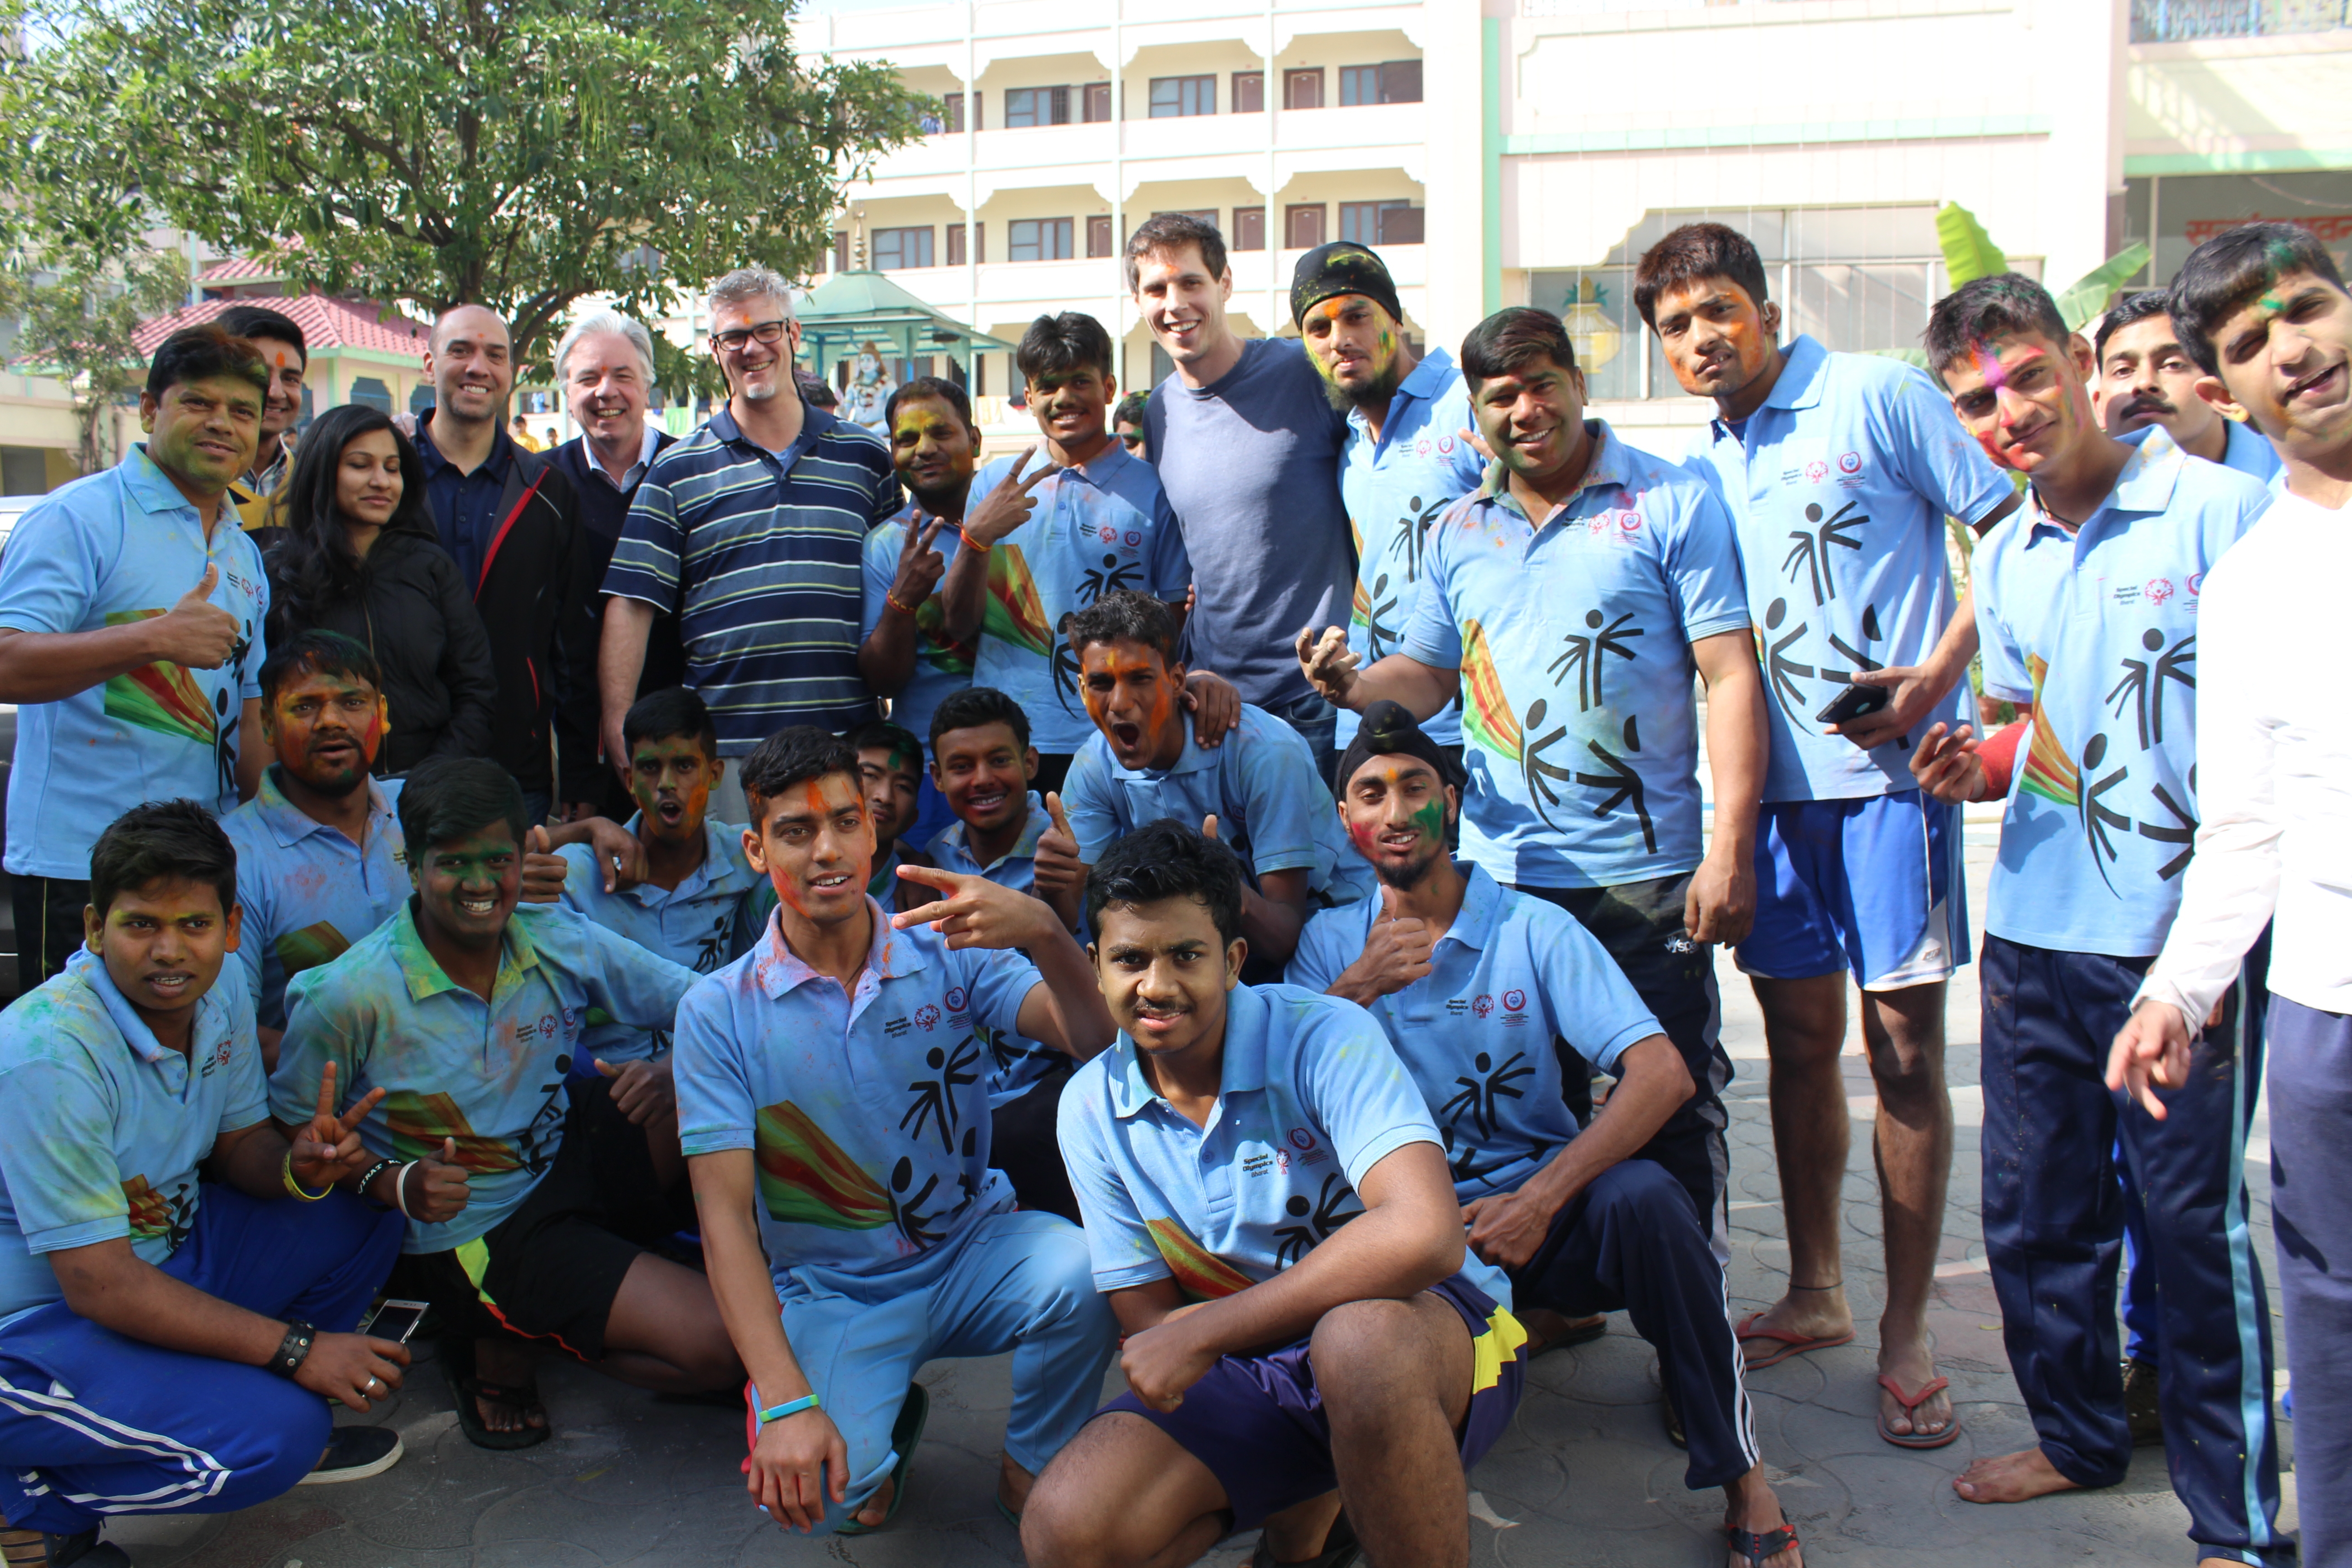 Producer Danny Arruda, reporter Chris Connelly the Special Olympics team in India. 